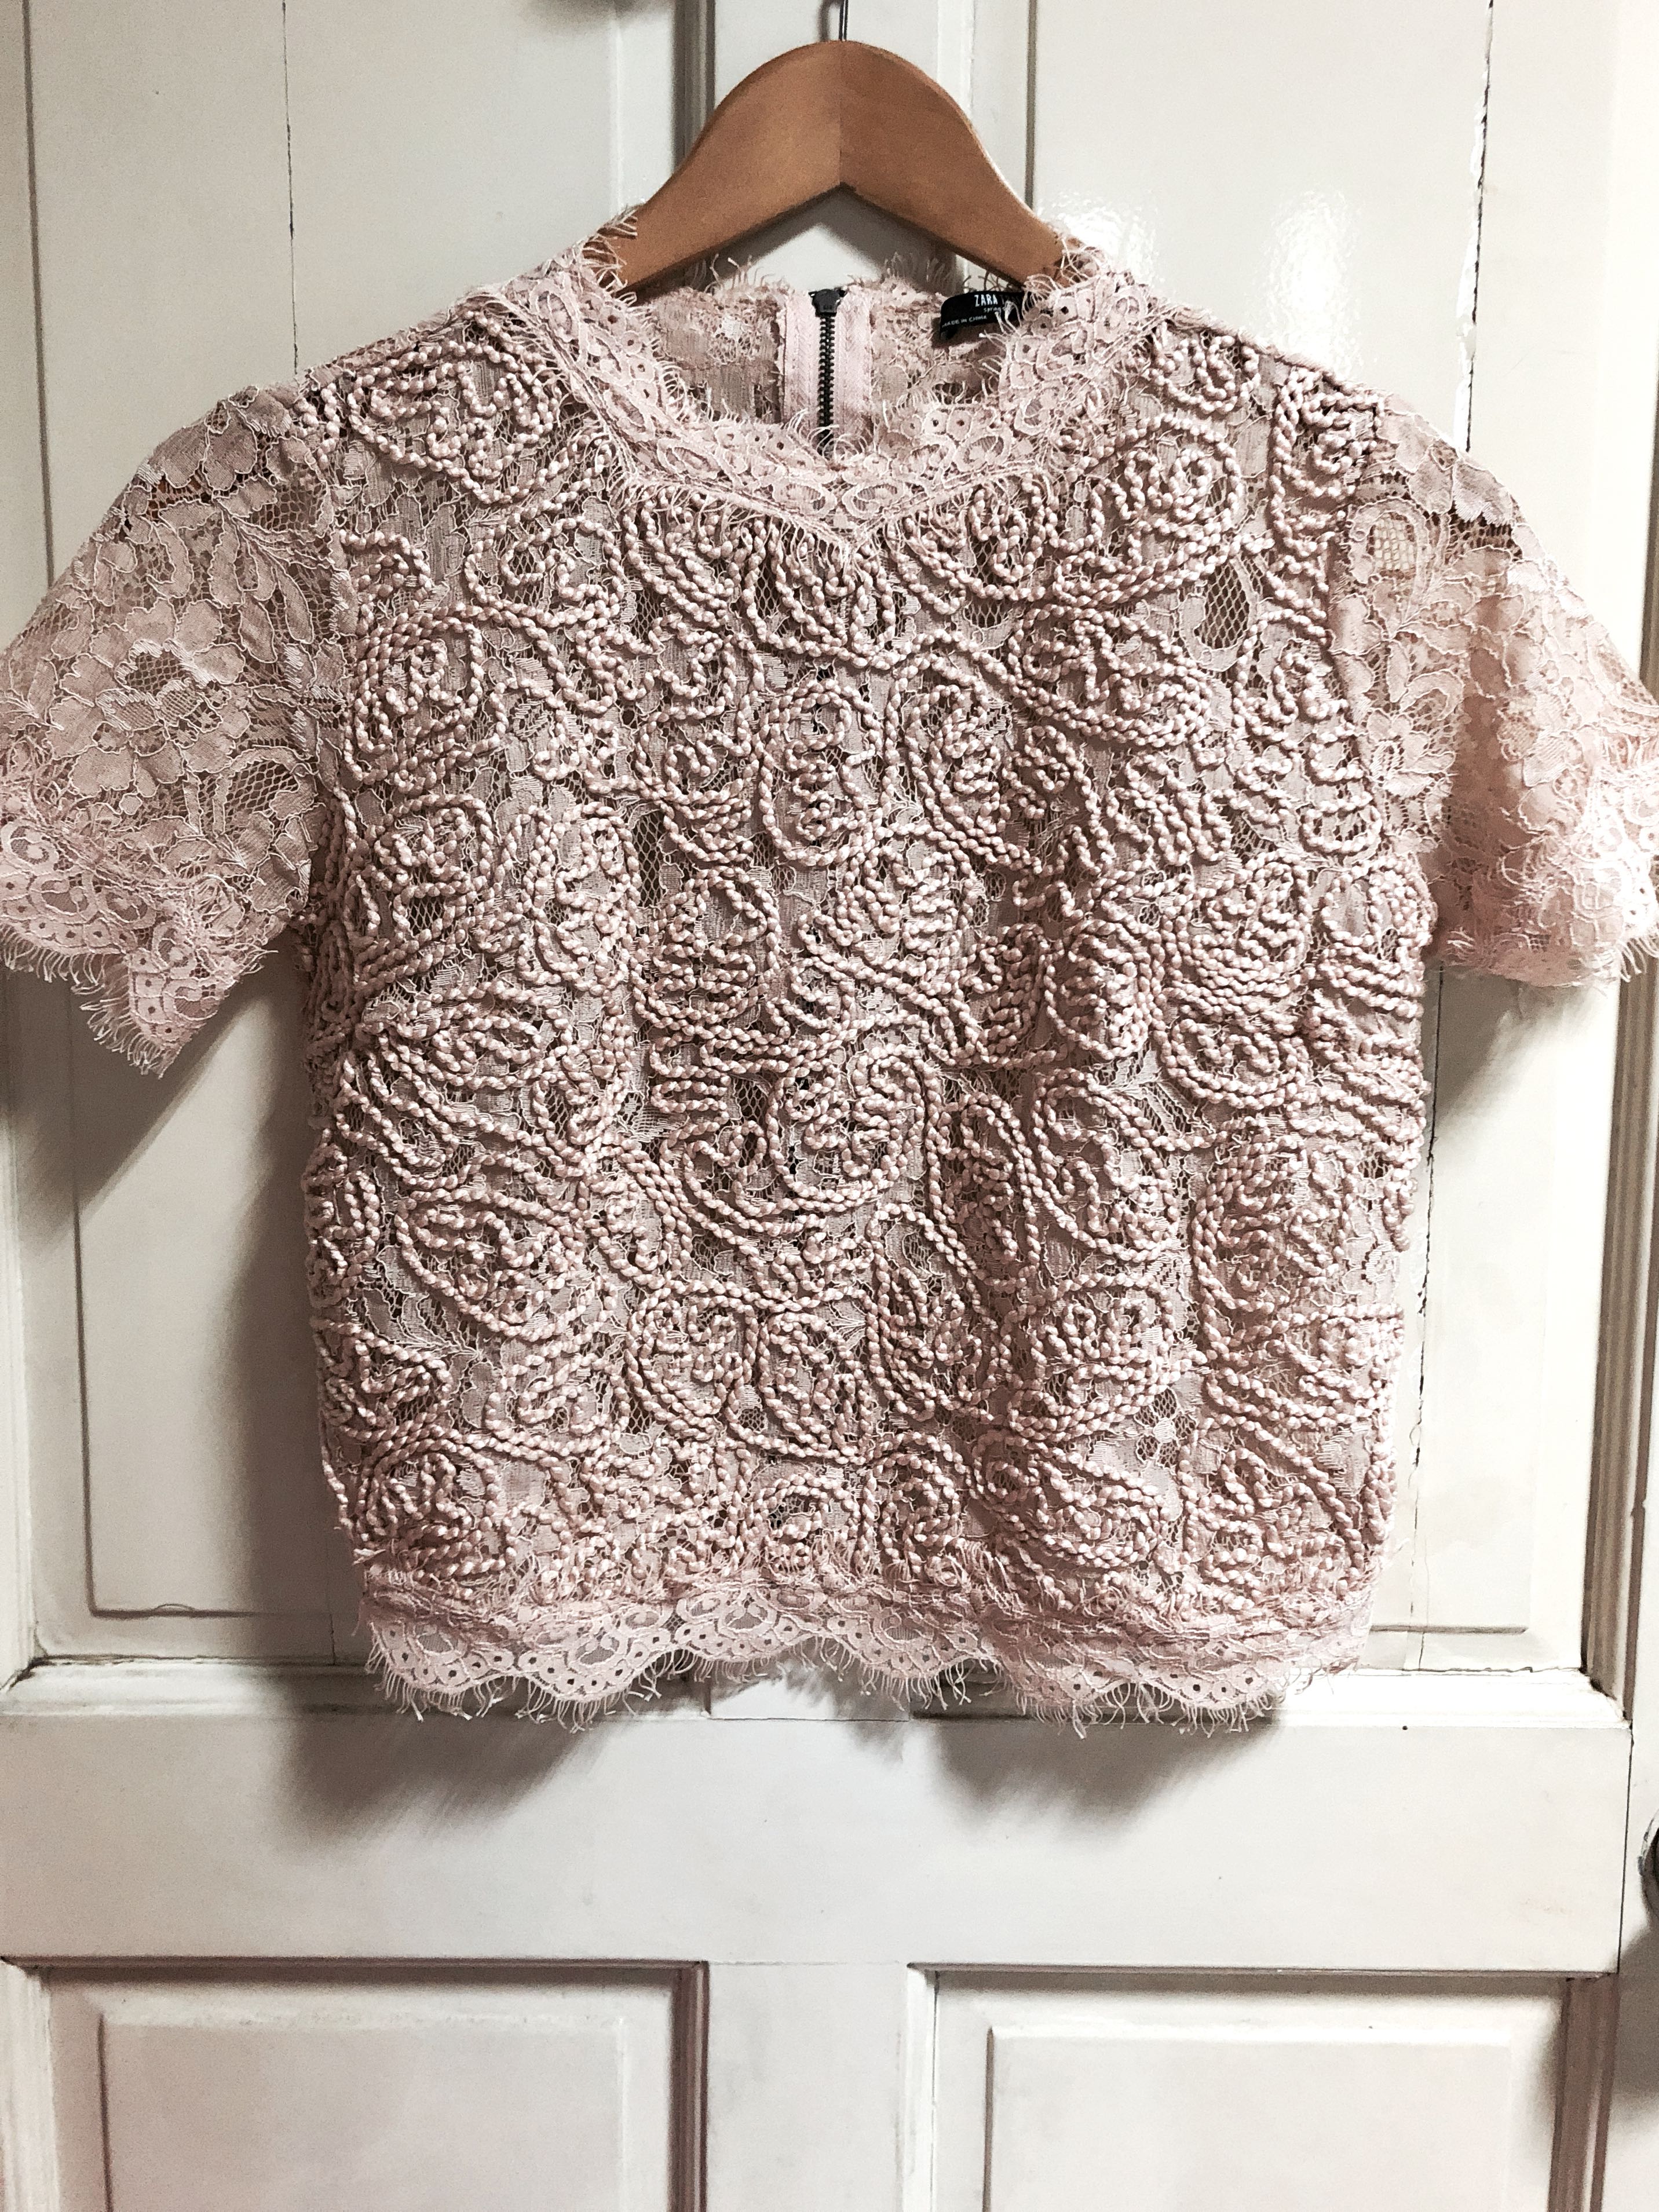 zara embroidered lace top